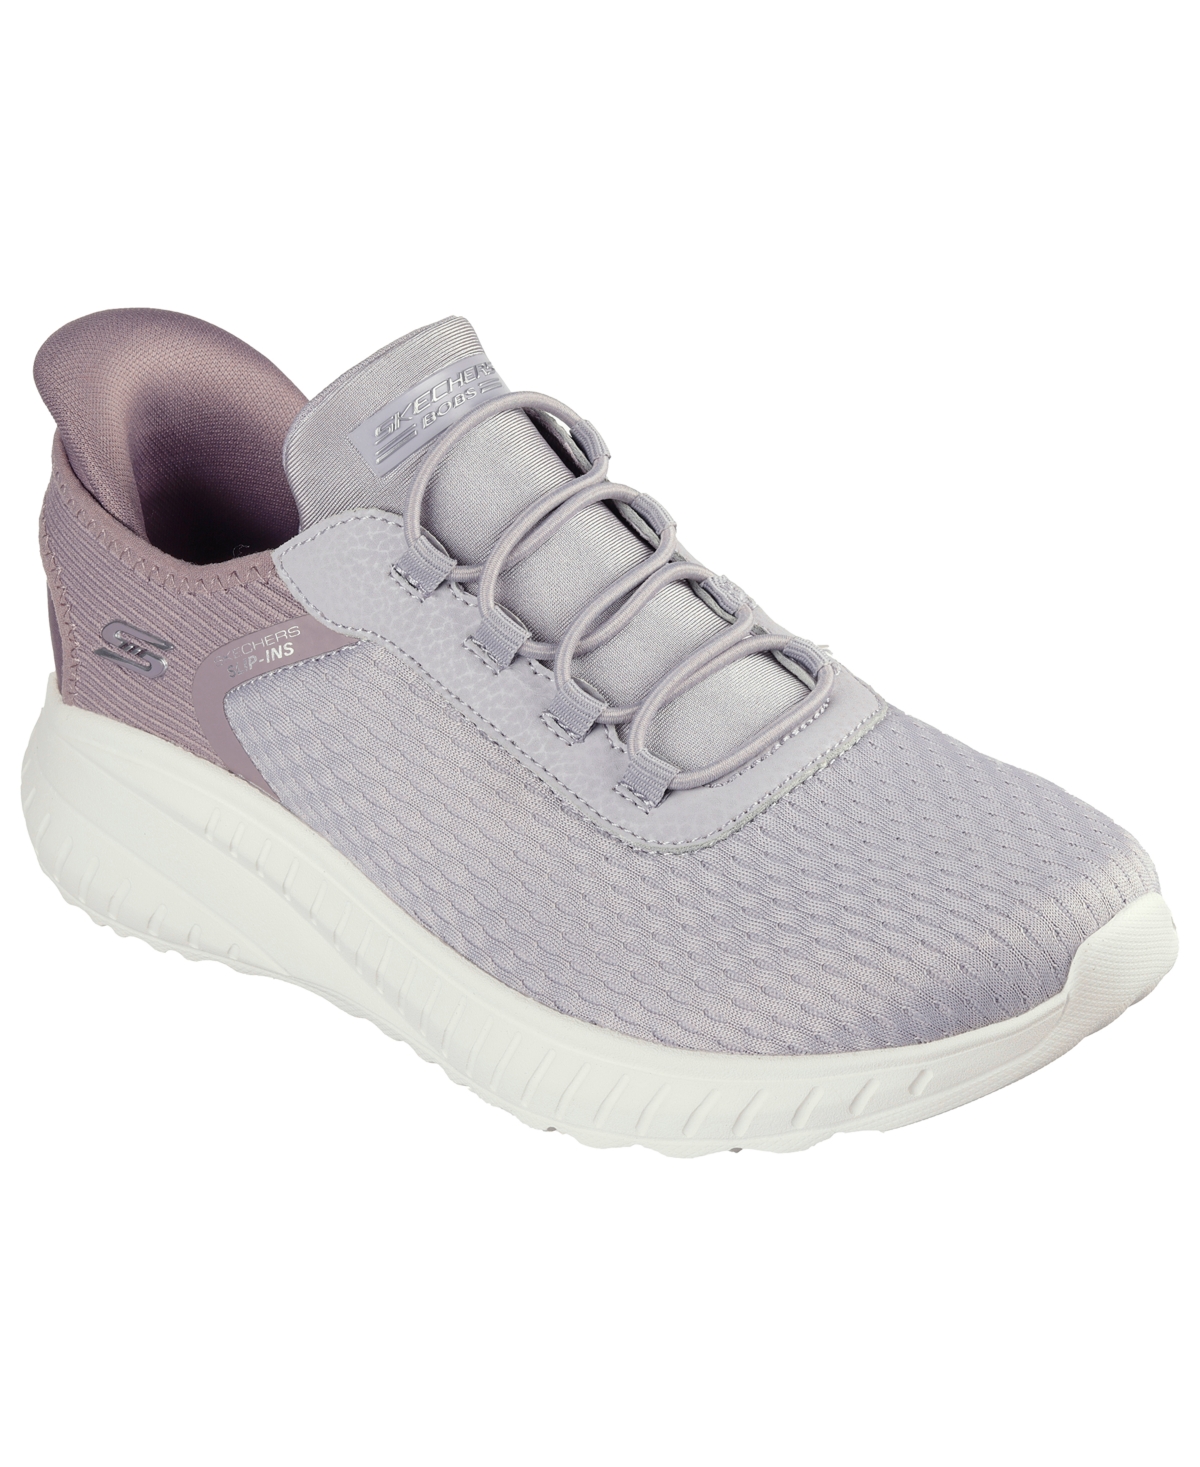 Women's Slip-Ins Bobs Sport Squad Chaos Walking Sneakers from Finish Line - Lavender